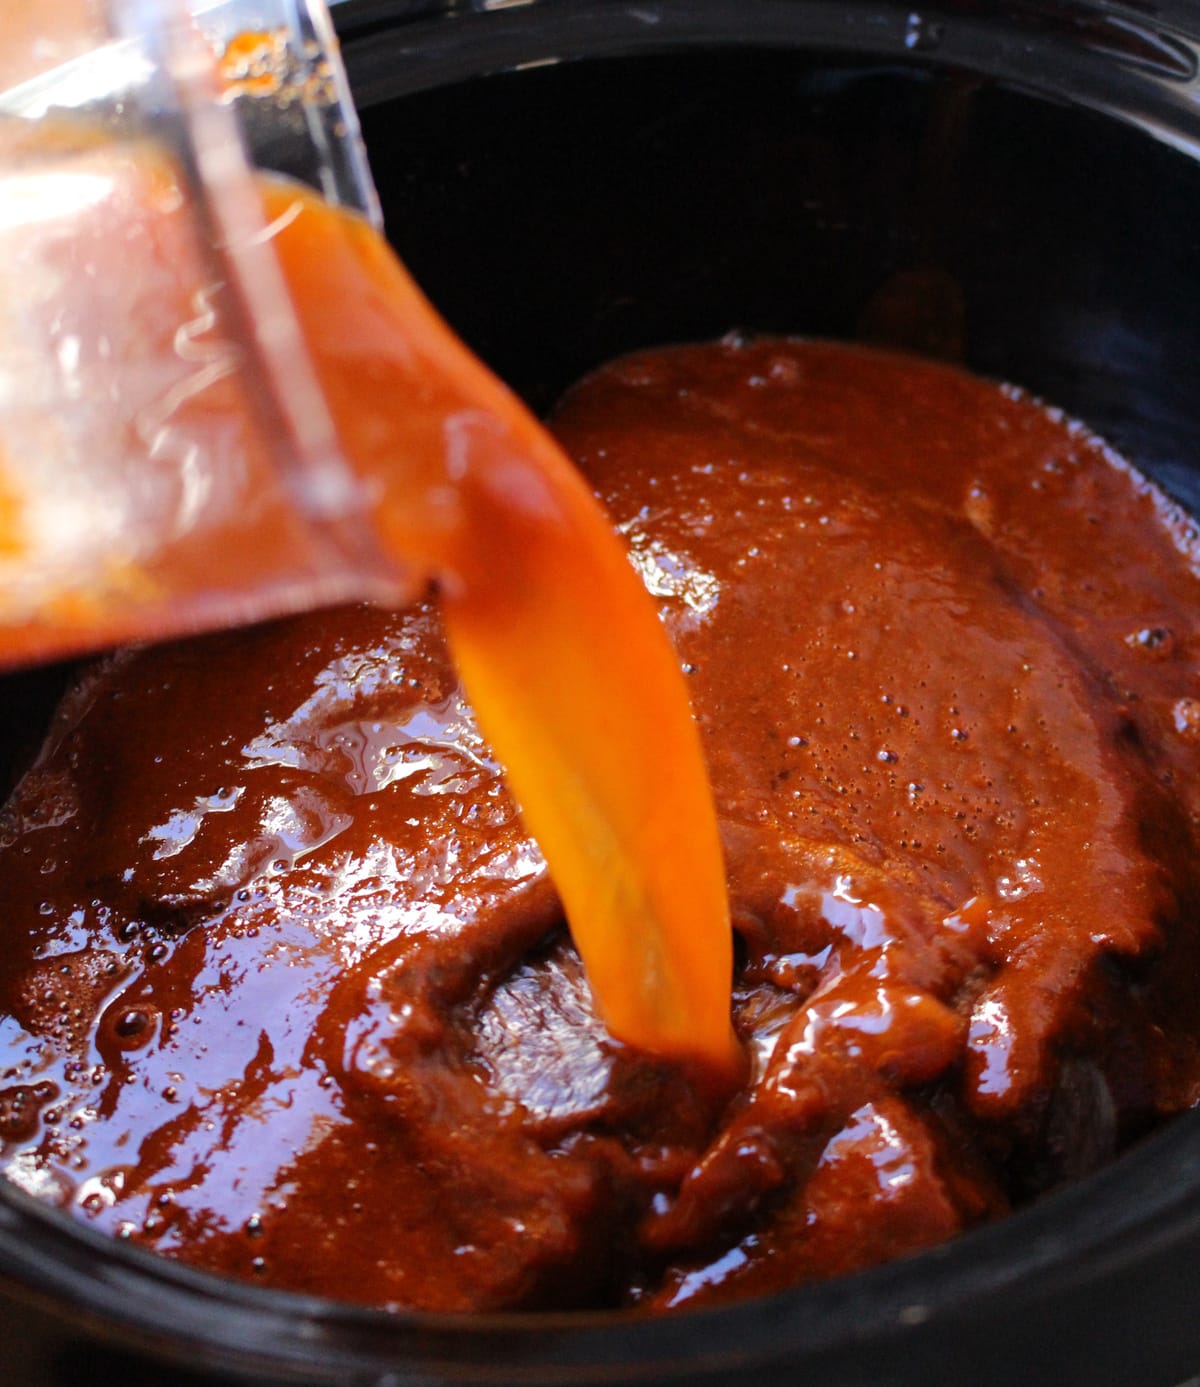 Chile sauce pouring into the slow cooker over the beef.